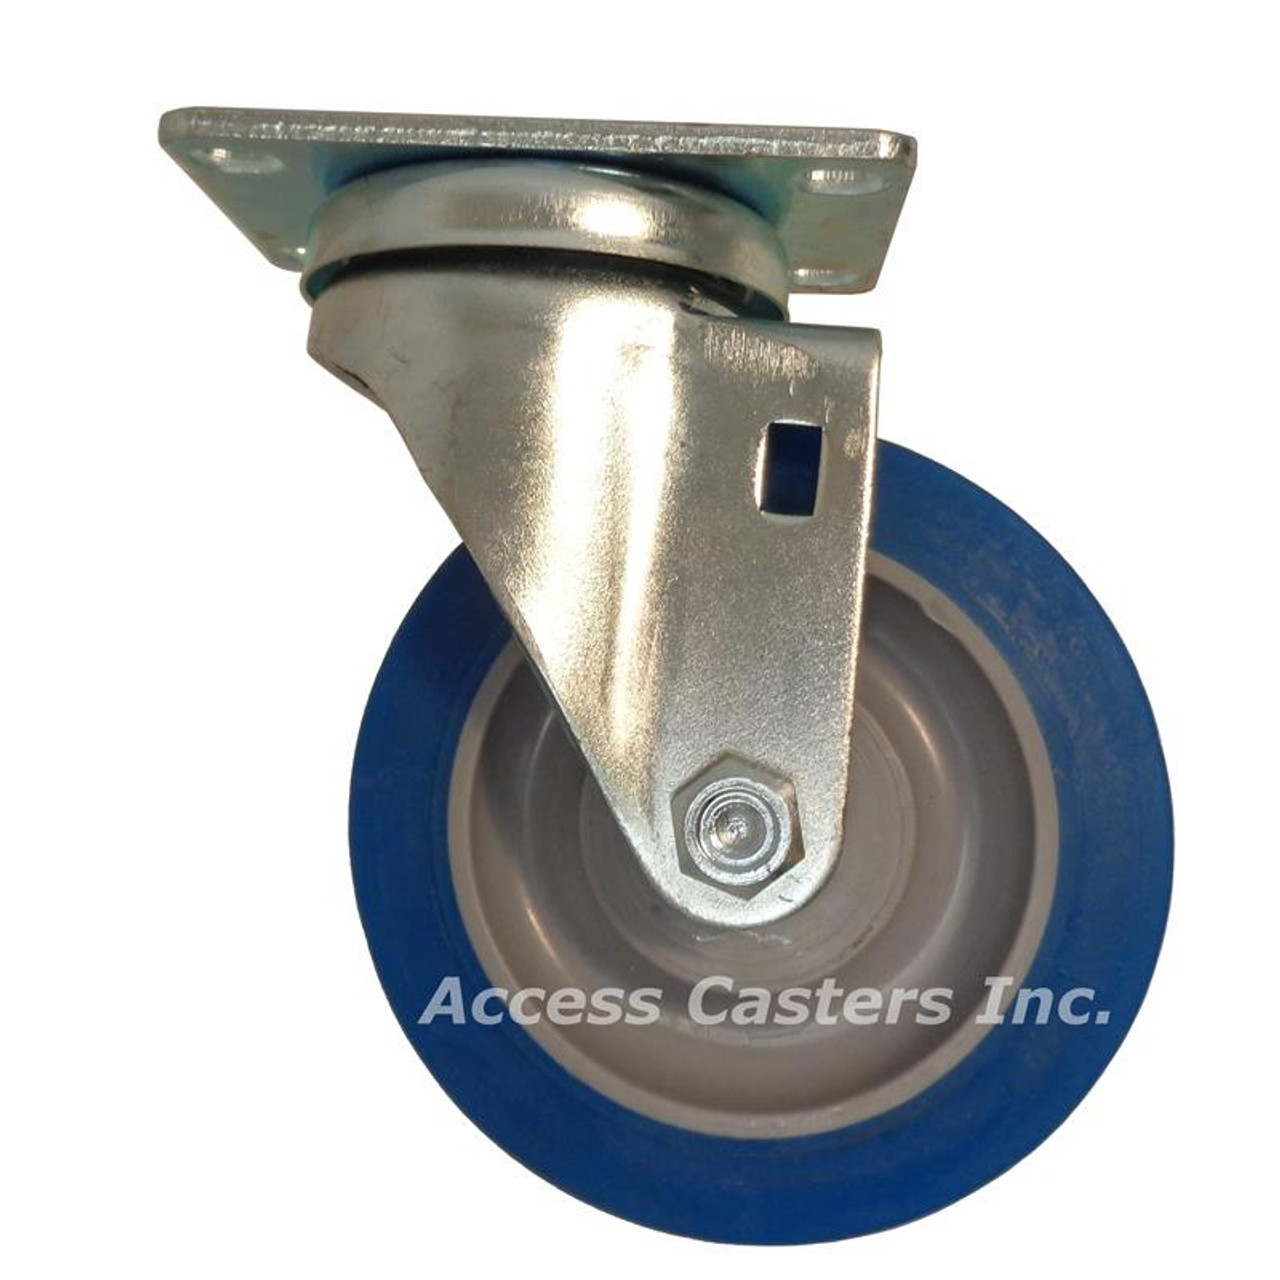 4D20BNMS Four Inch Swivel Caster with Blue Tread TPR Wheel